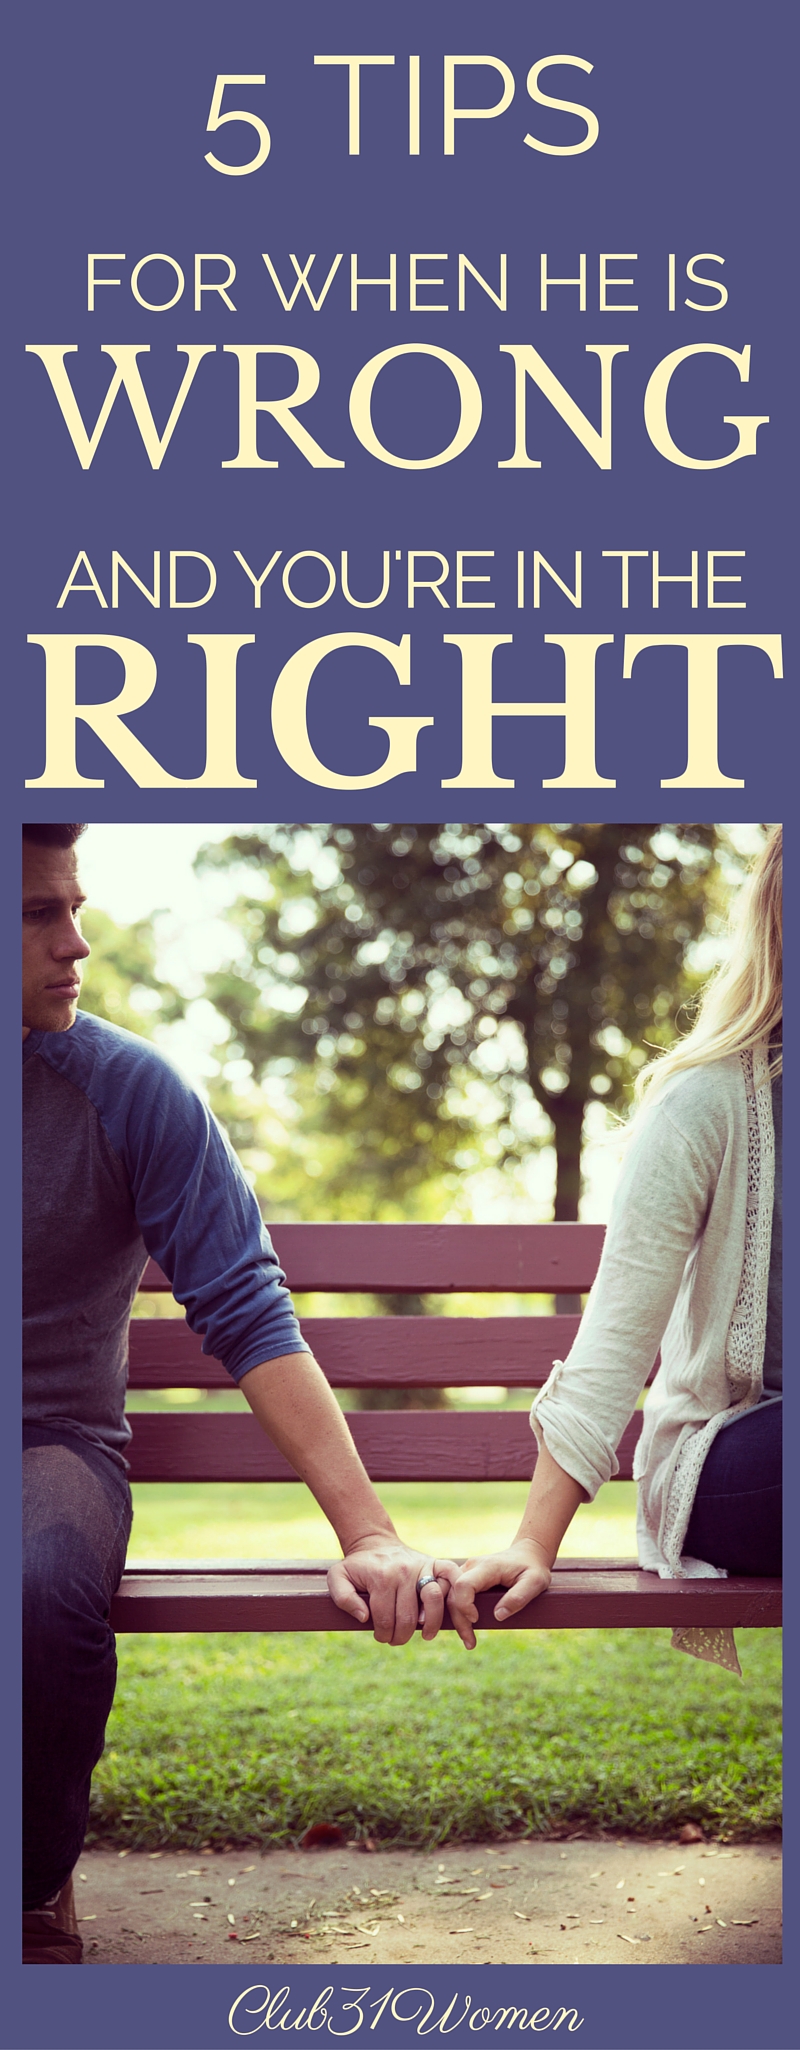 5 Tips for When He Is Wrong and You’re In the Right